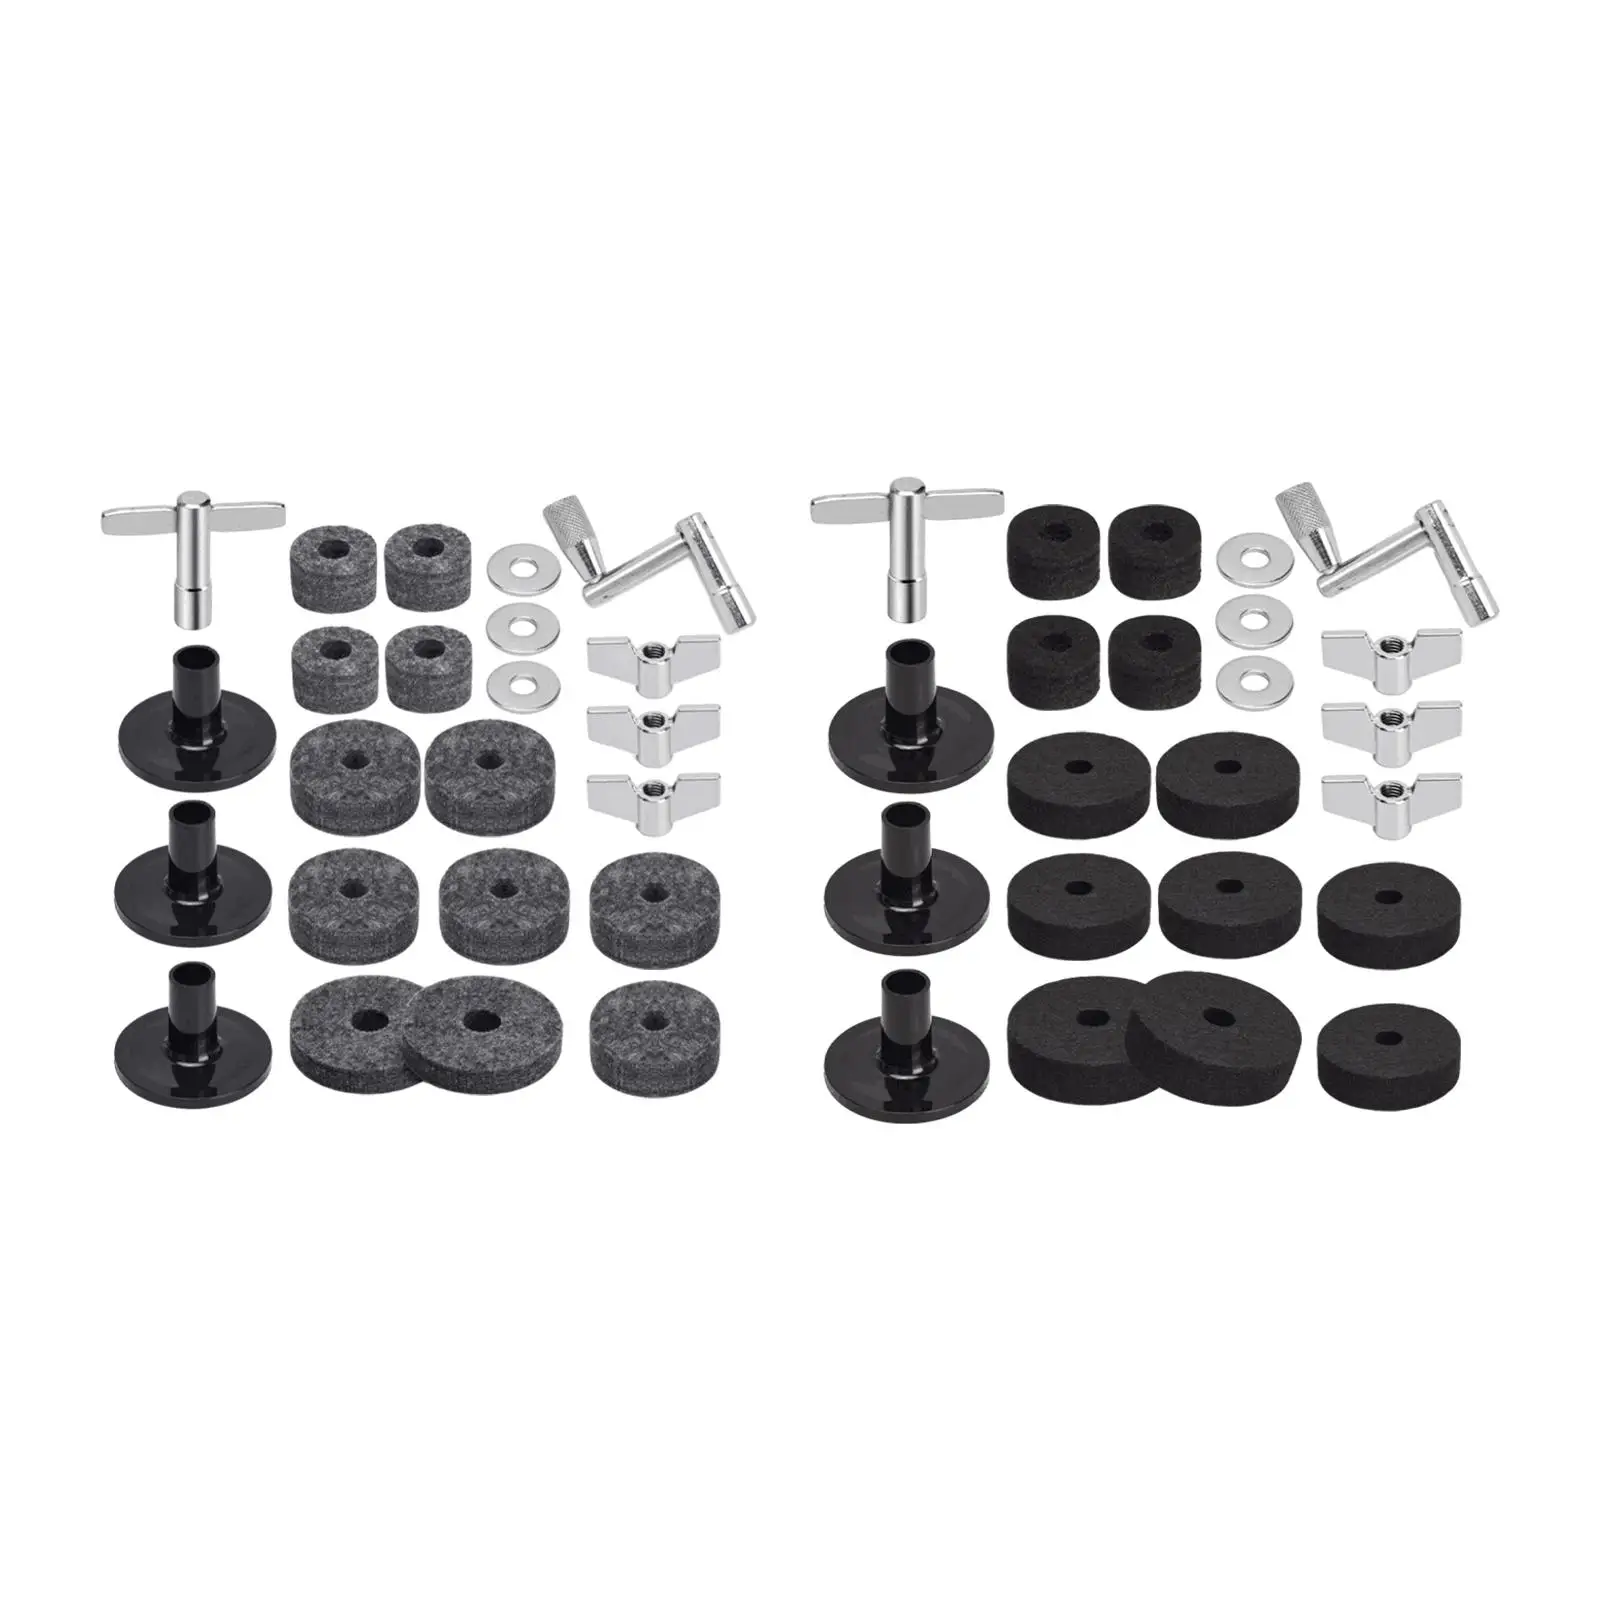 23x Cymbal Sleeve and Felt Washers for Shelf Drum Kits Cymbal Replacement